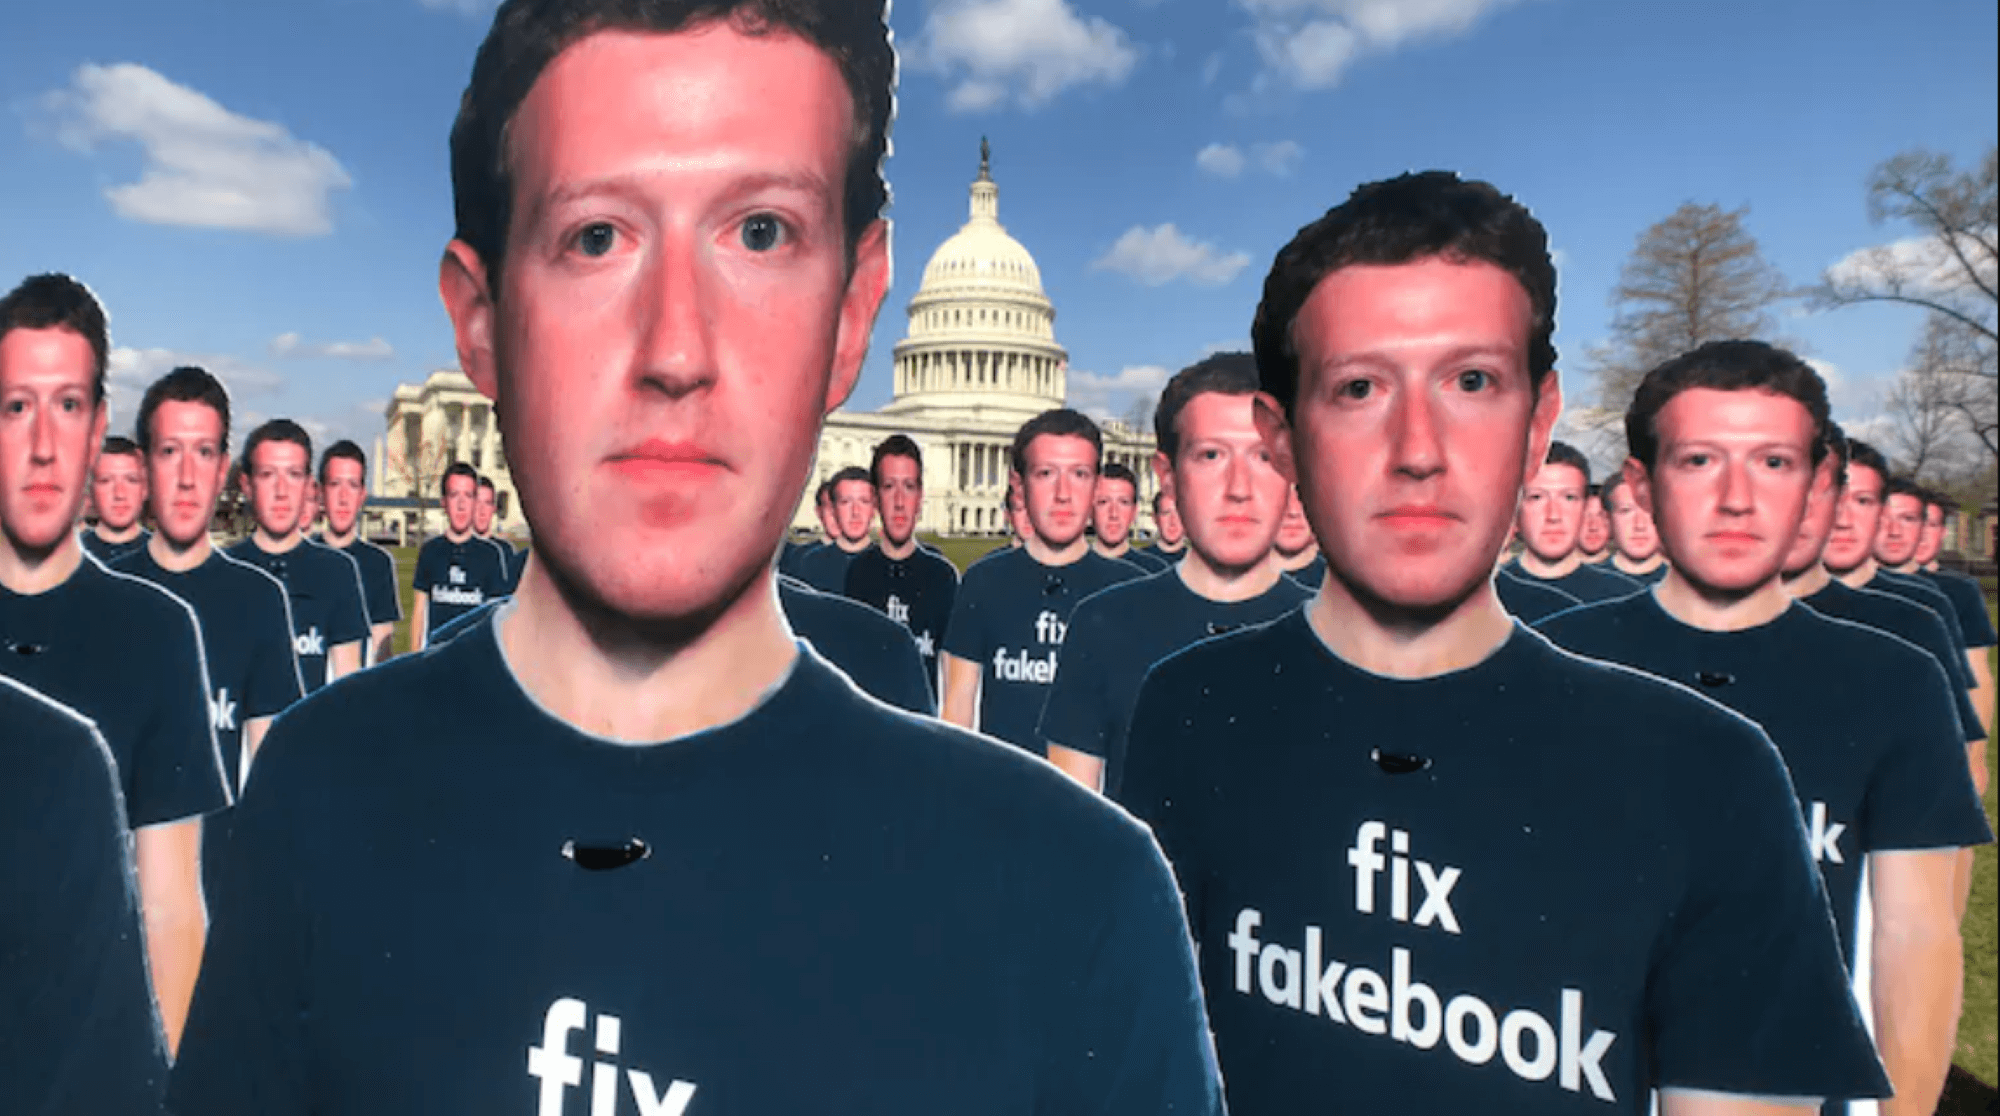 cut-outs of Mark Zuckerberg are lined up in front of the US Capitol building on sunny day like a creepy army. Each of the cutouts has the words "fix facebook" on their t-shirts.